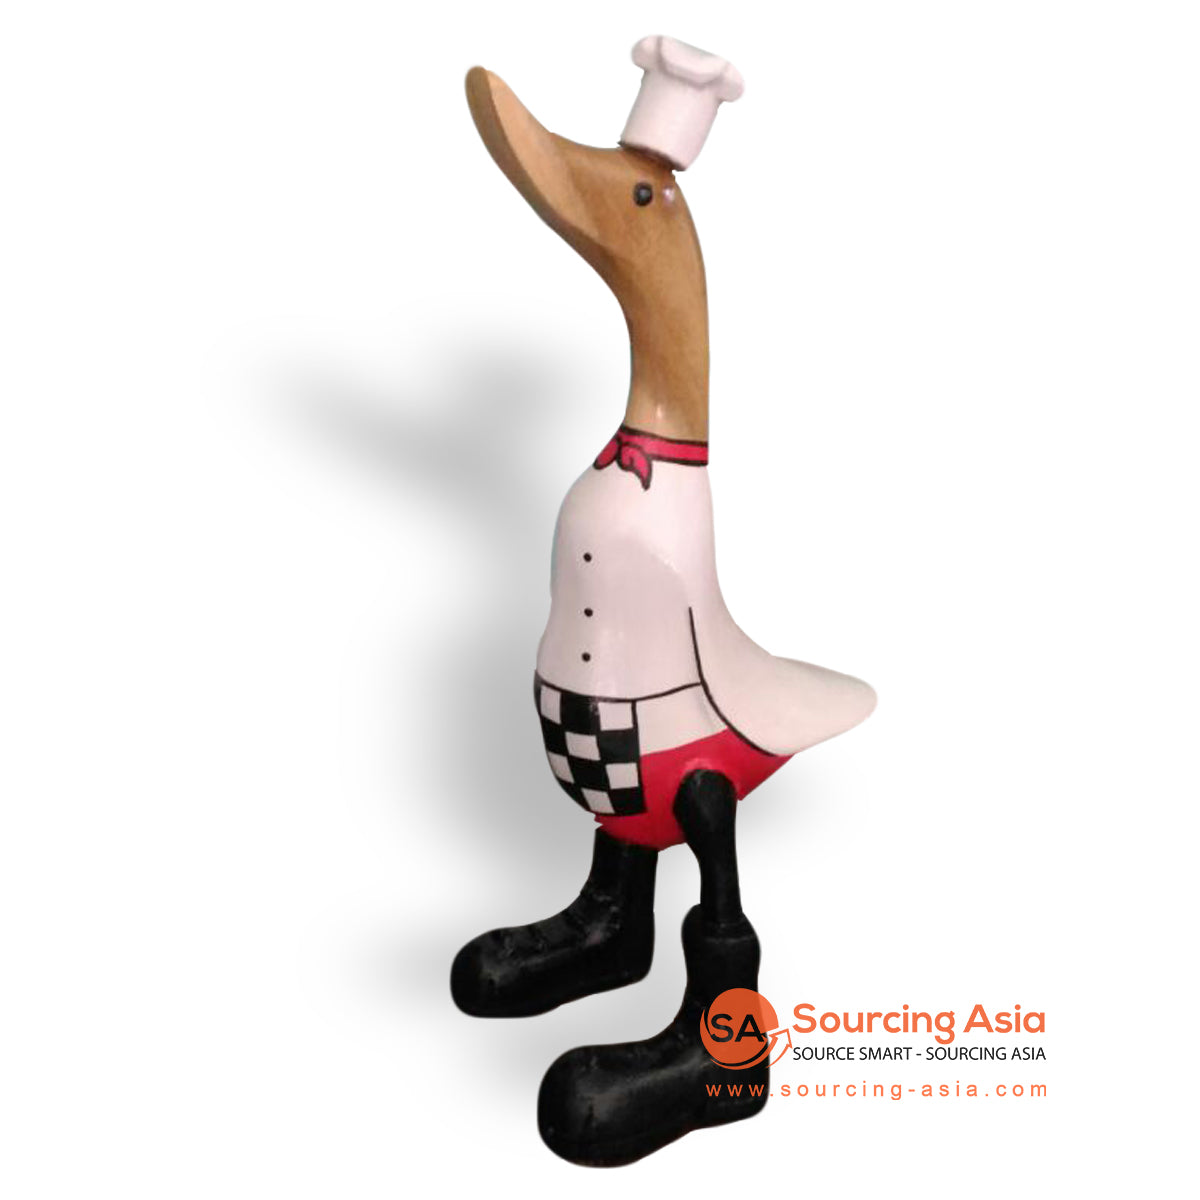 GGA003-35 WOODEN CHEF DUCK DECORATION WITH BLACK AND WHITE APRON